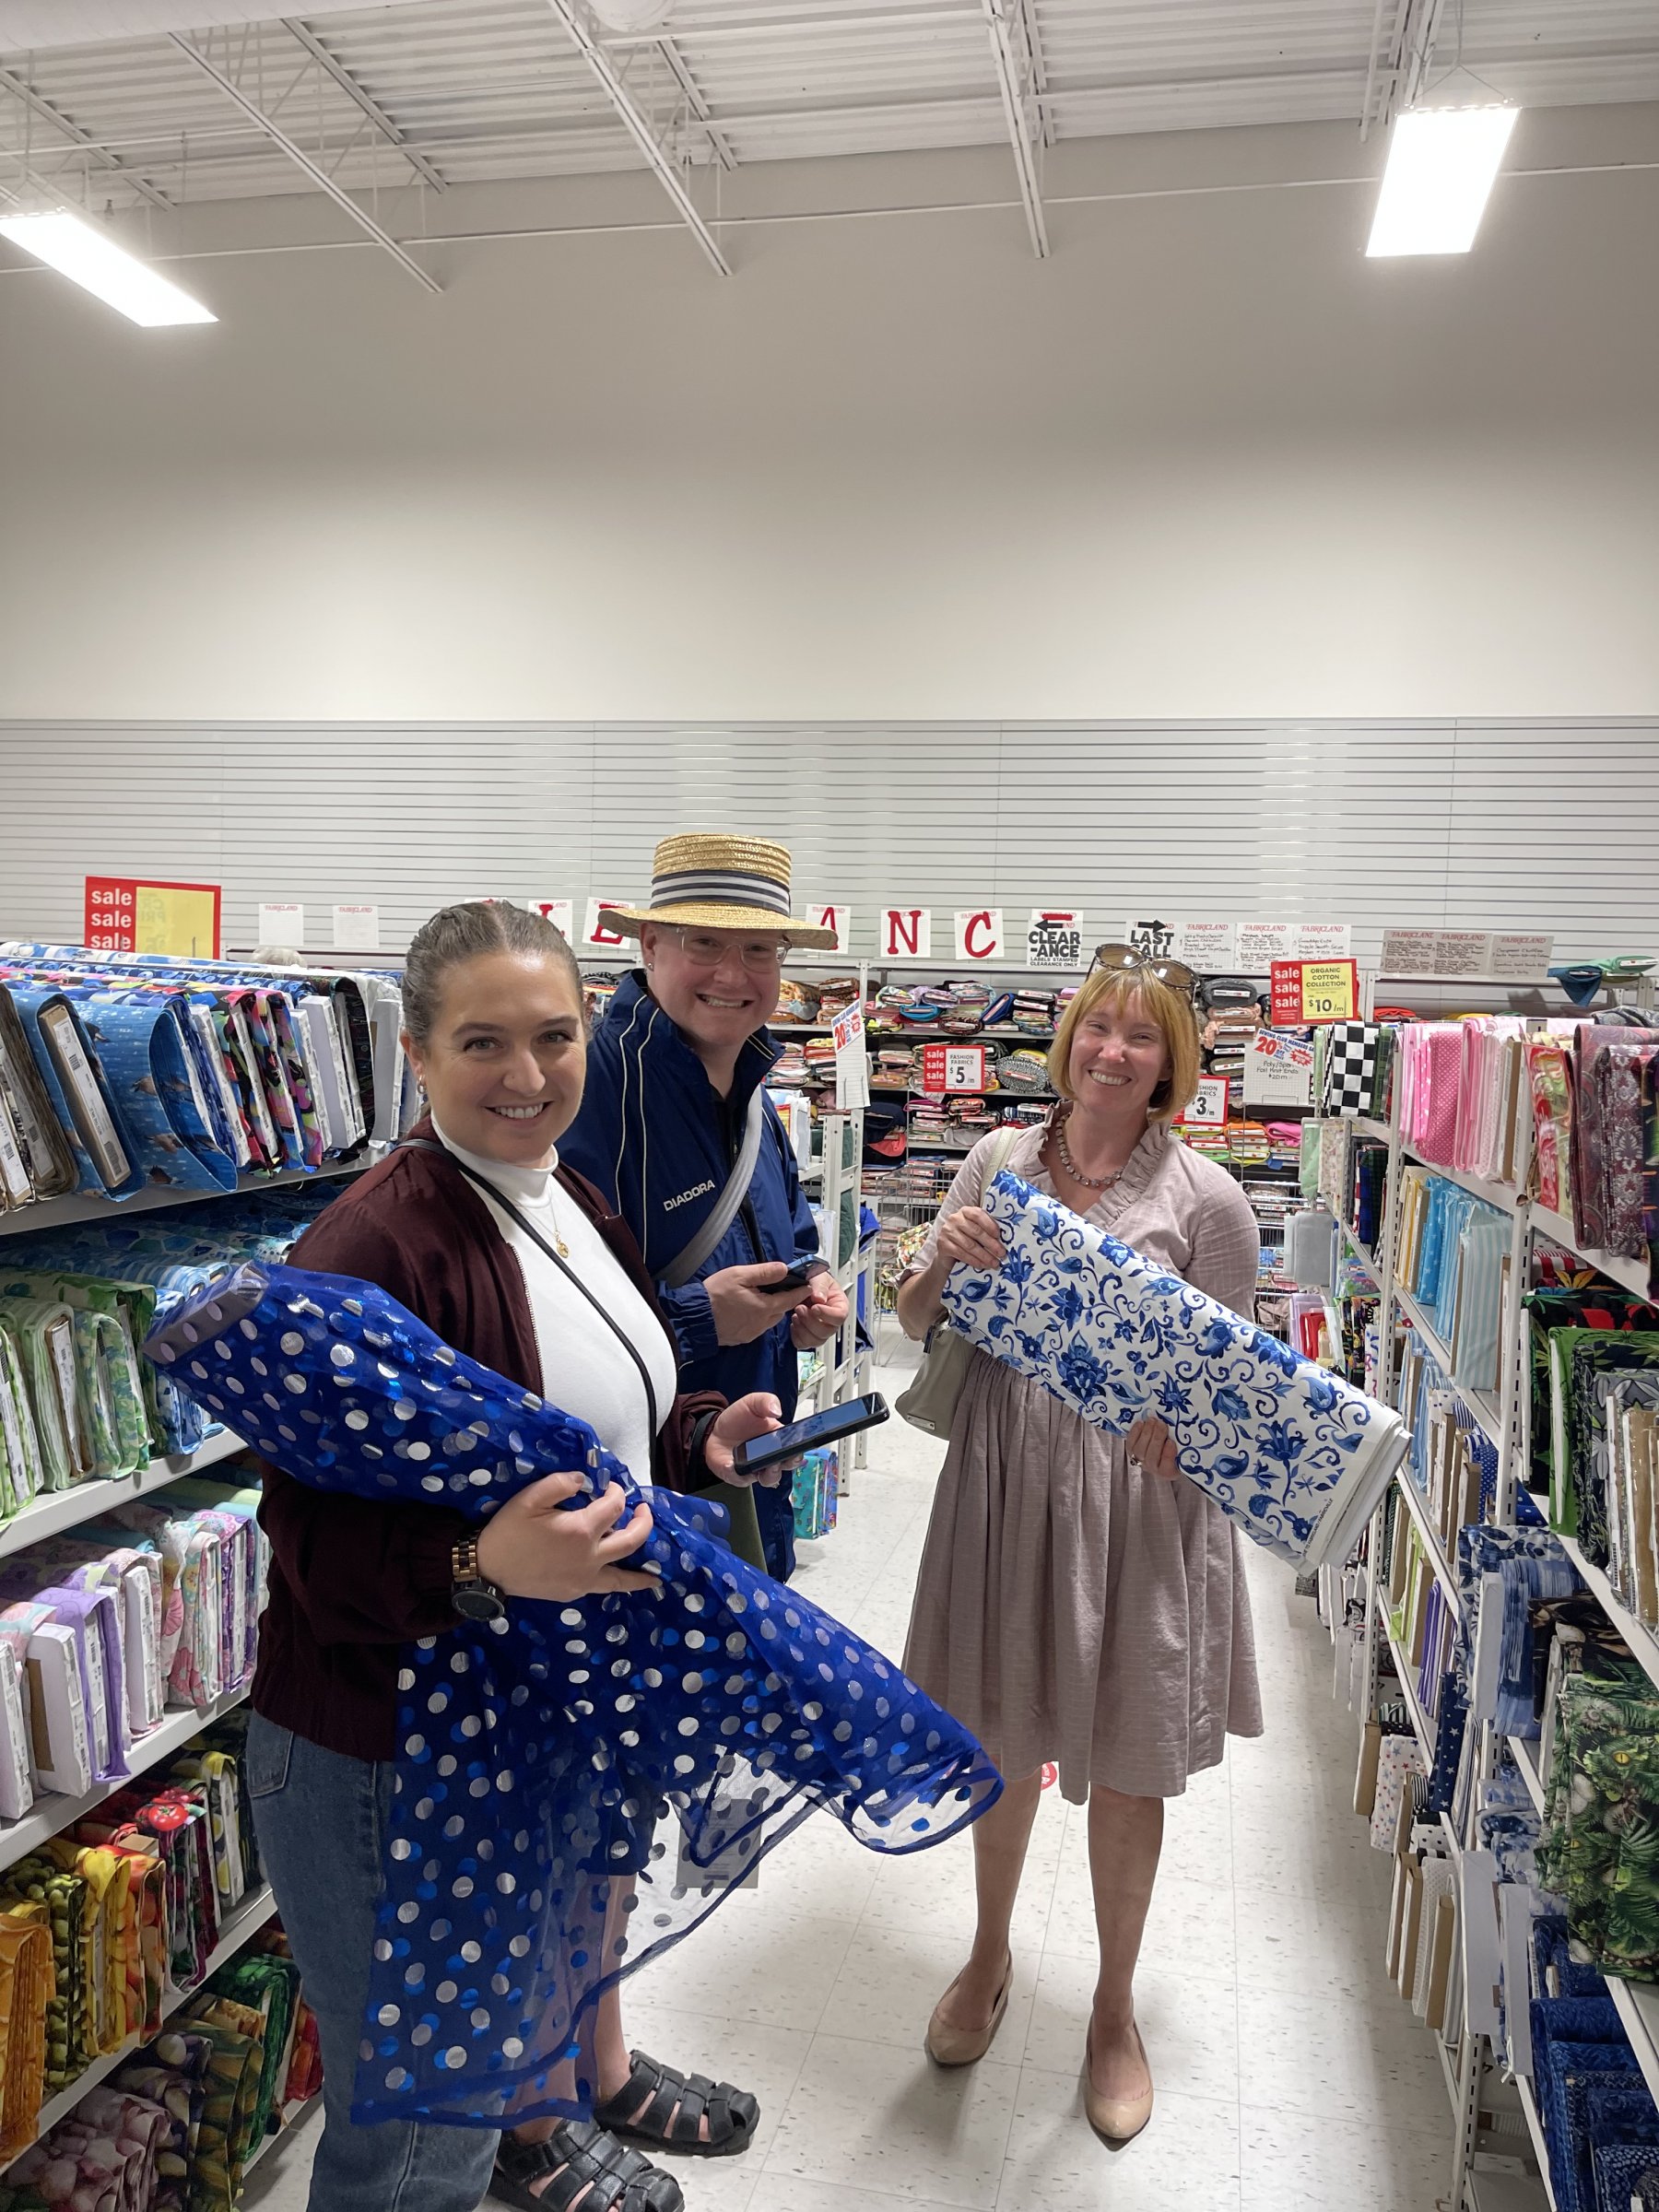 At the store, Marissa Monette holds blue polka dot tulle, Carolyn Dowdell holds a blue delft patterned fabric. Tyffanie Morgan smiles in the middle.